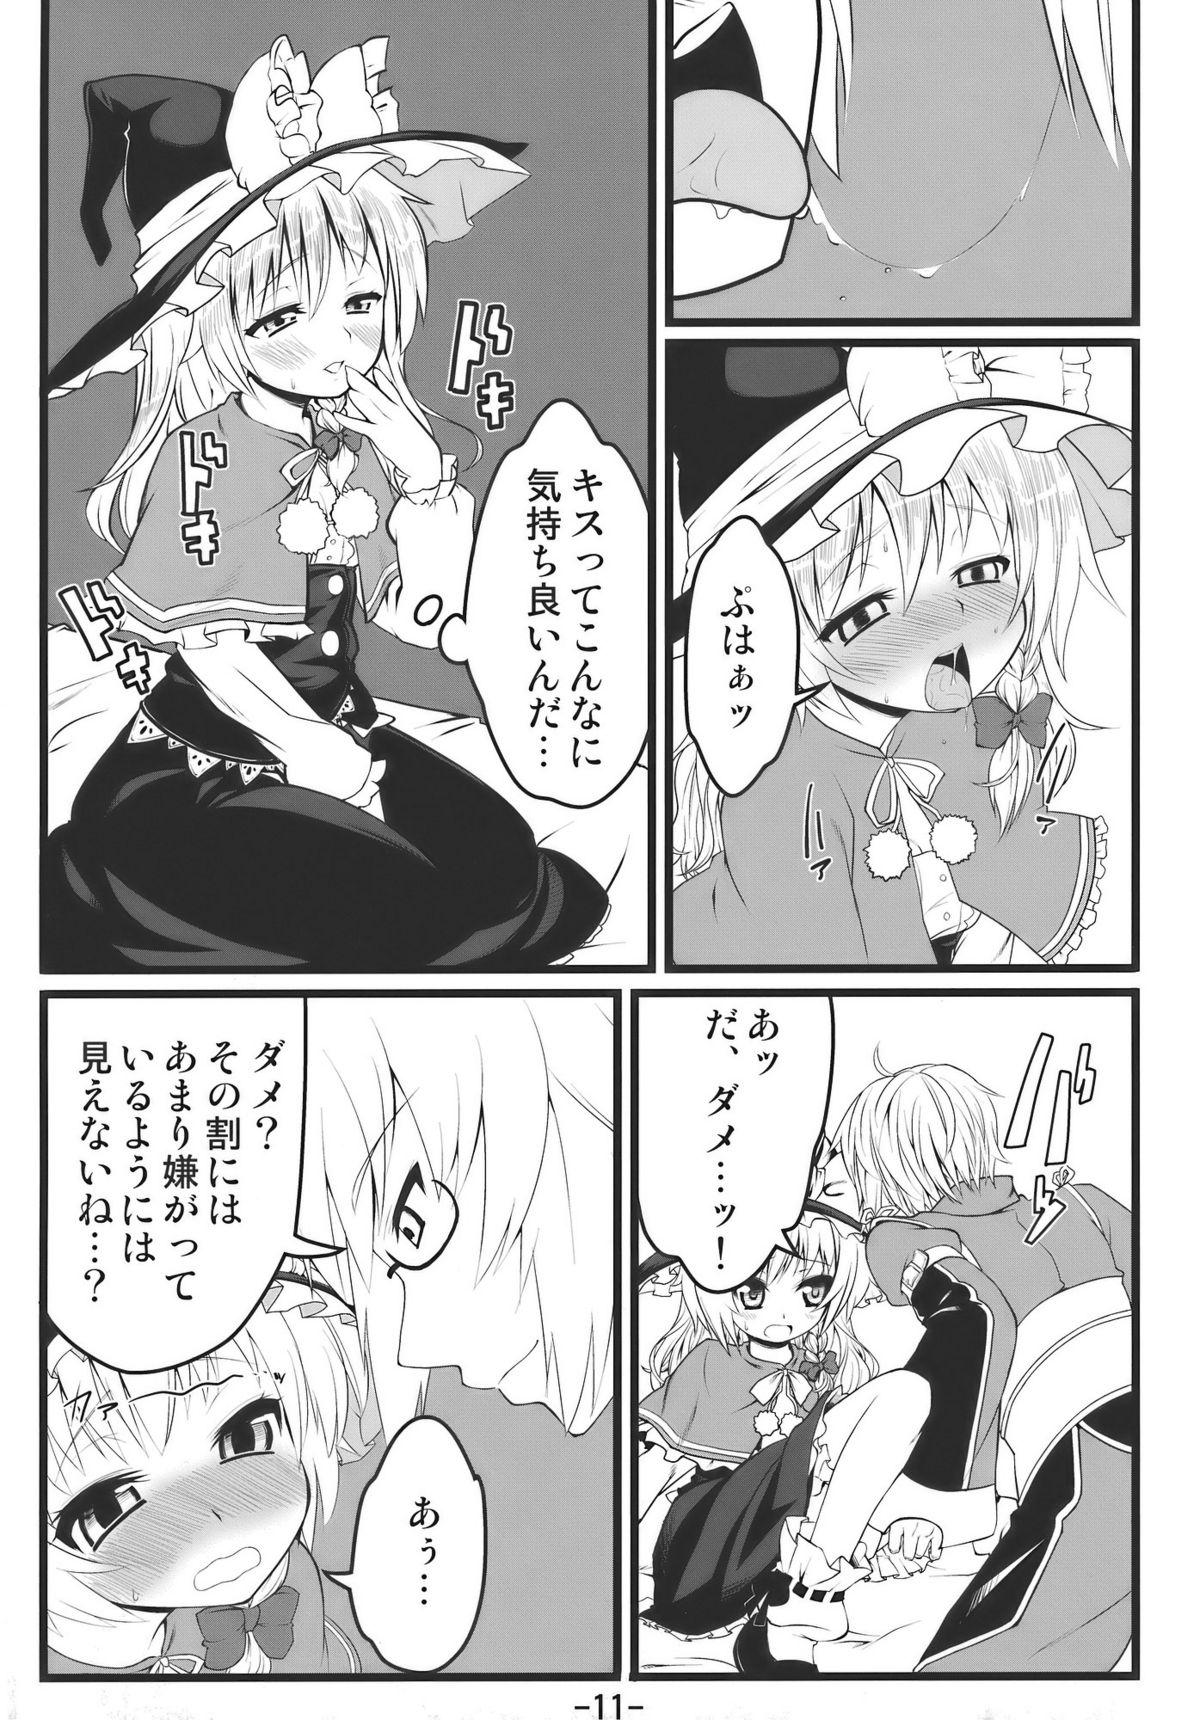 Sex Toys Memory of Junk - Touhou project Hardcore - Page 11